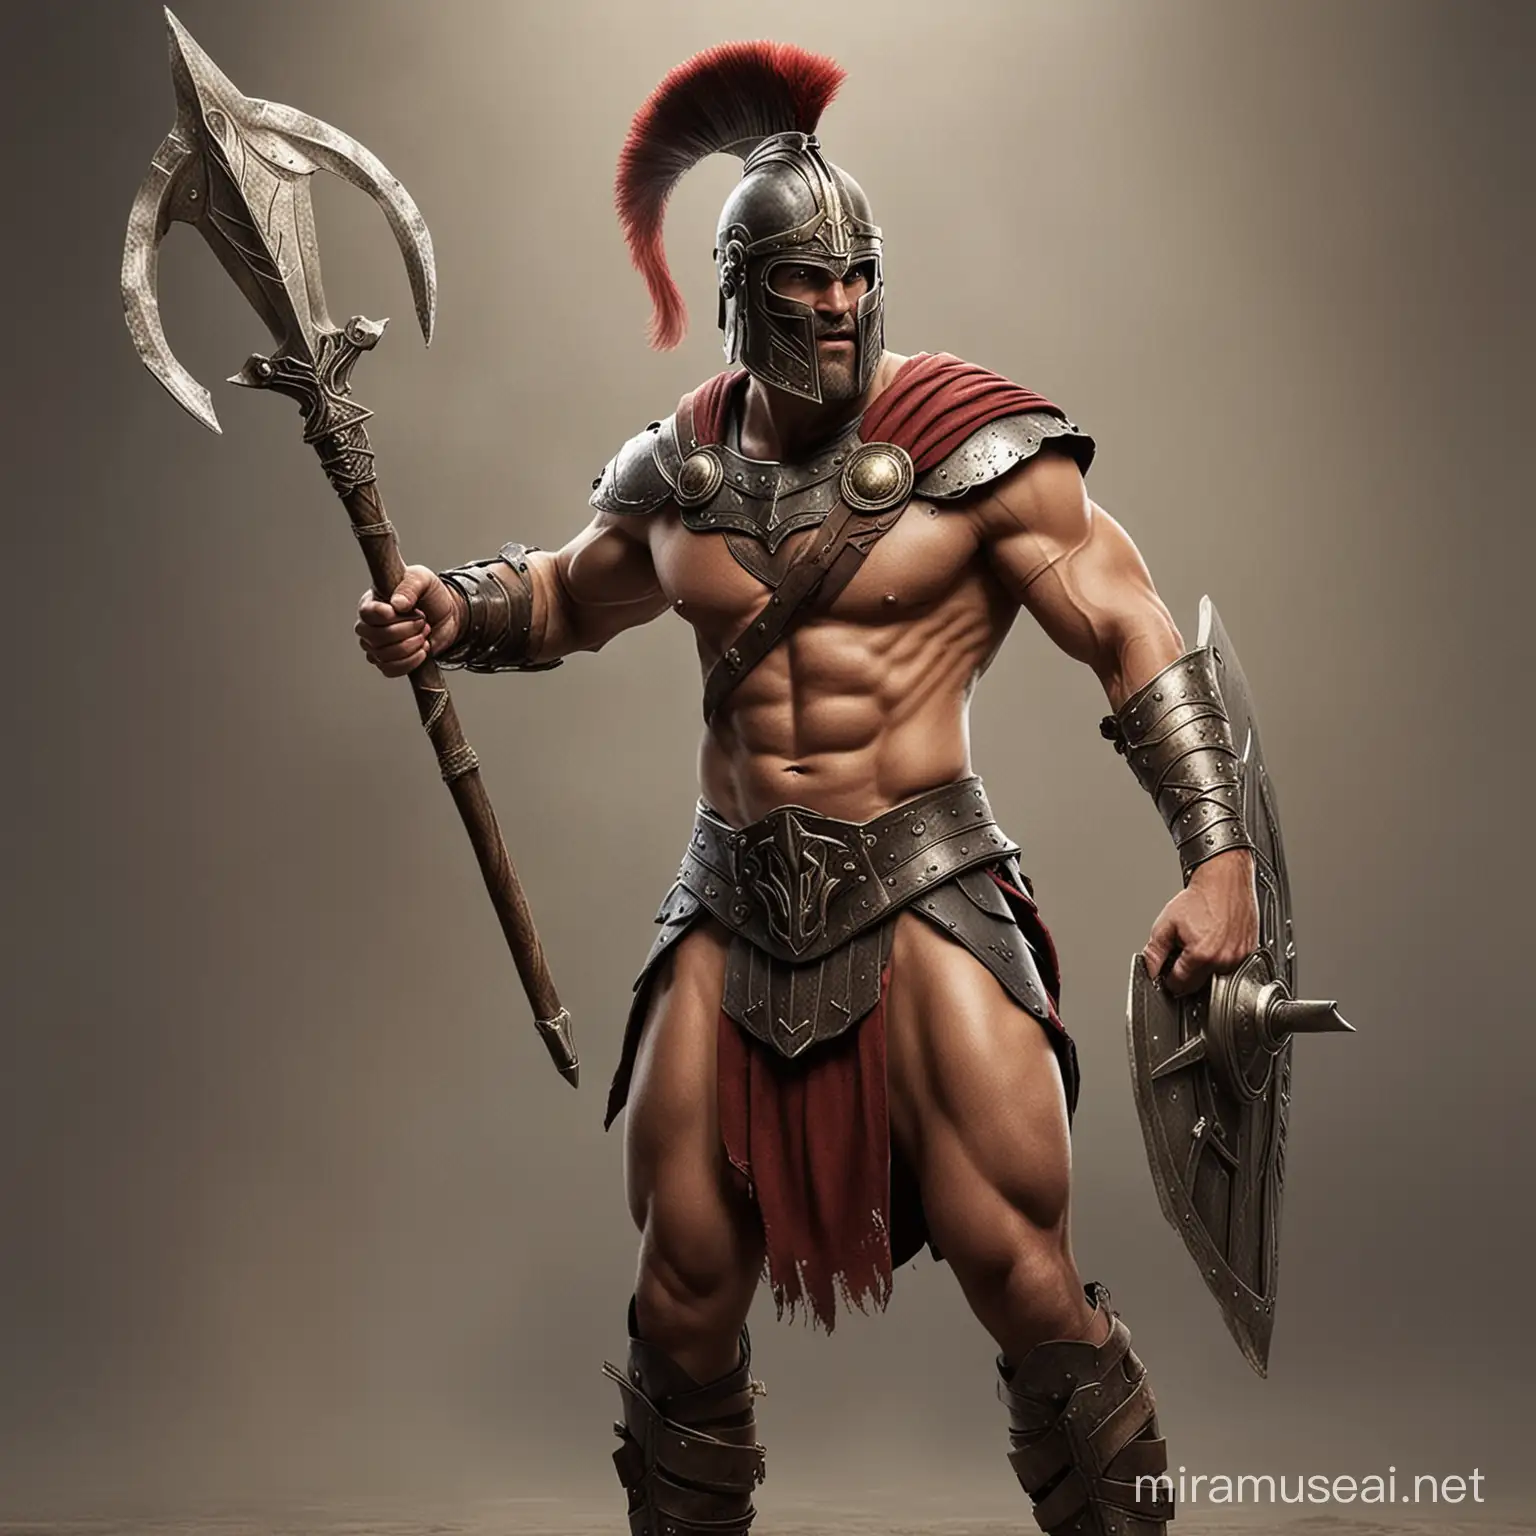 Powerful Gladiator Holding Trident in Arena